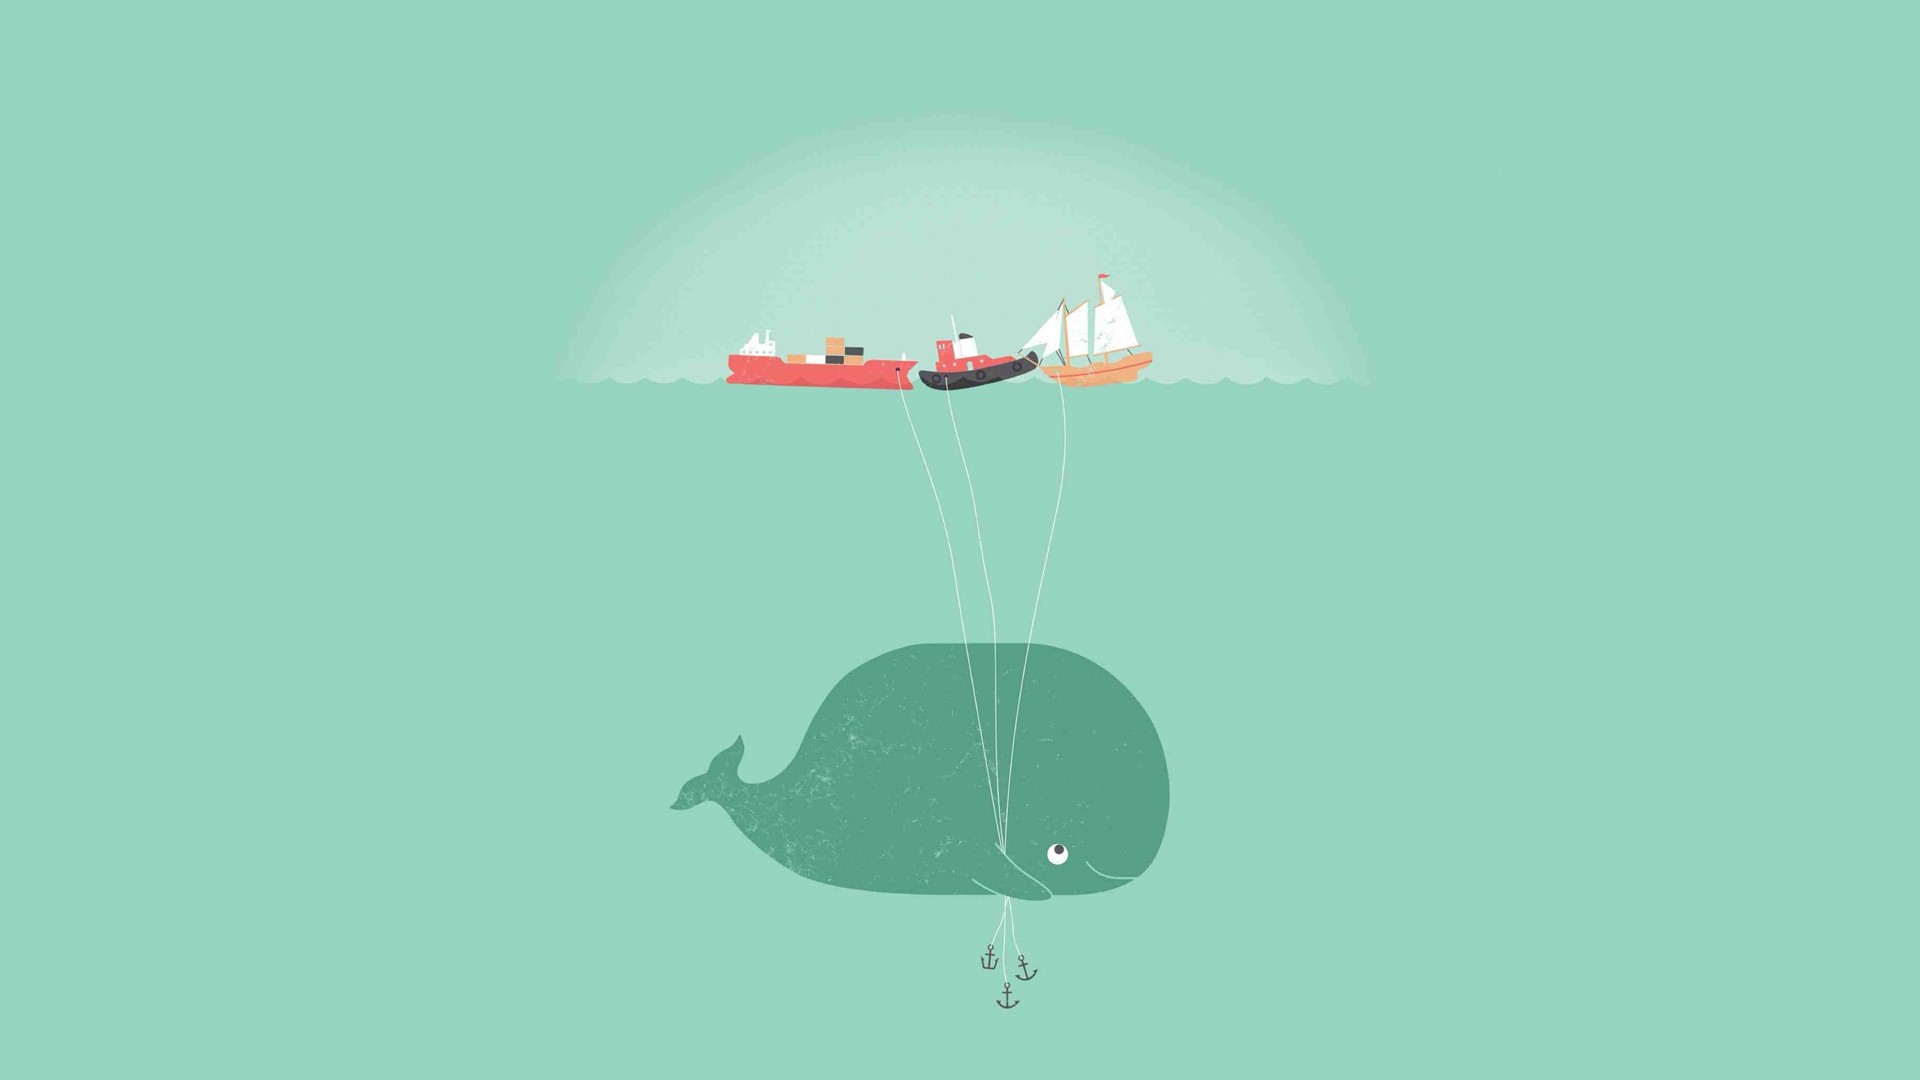 General 1920x1080 minimalism animals ship vehicle artwork simple background sea turquoise background boat turquoise green underwater mammals